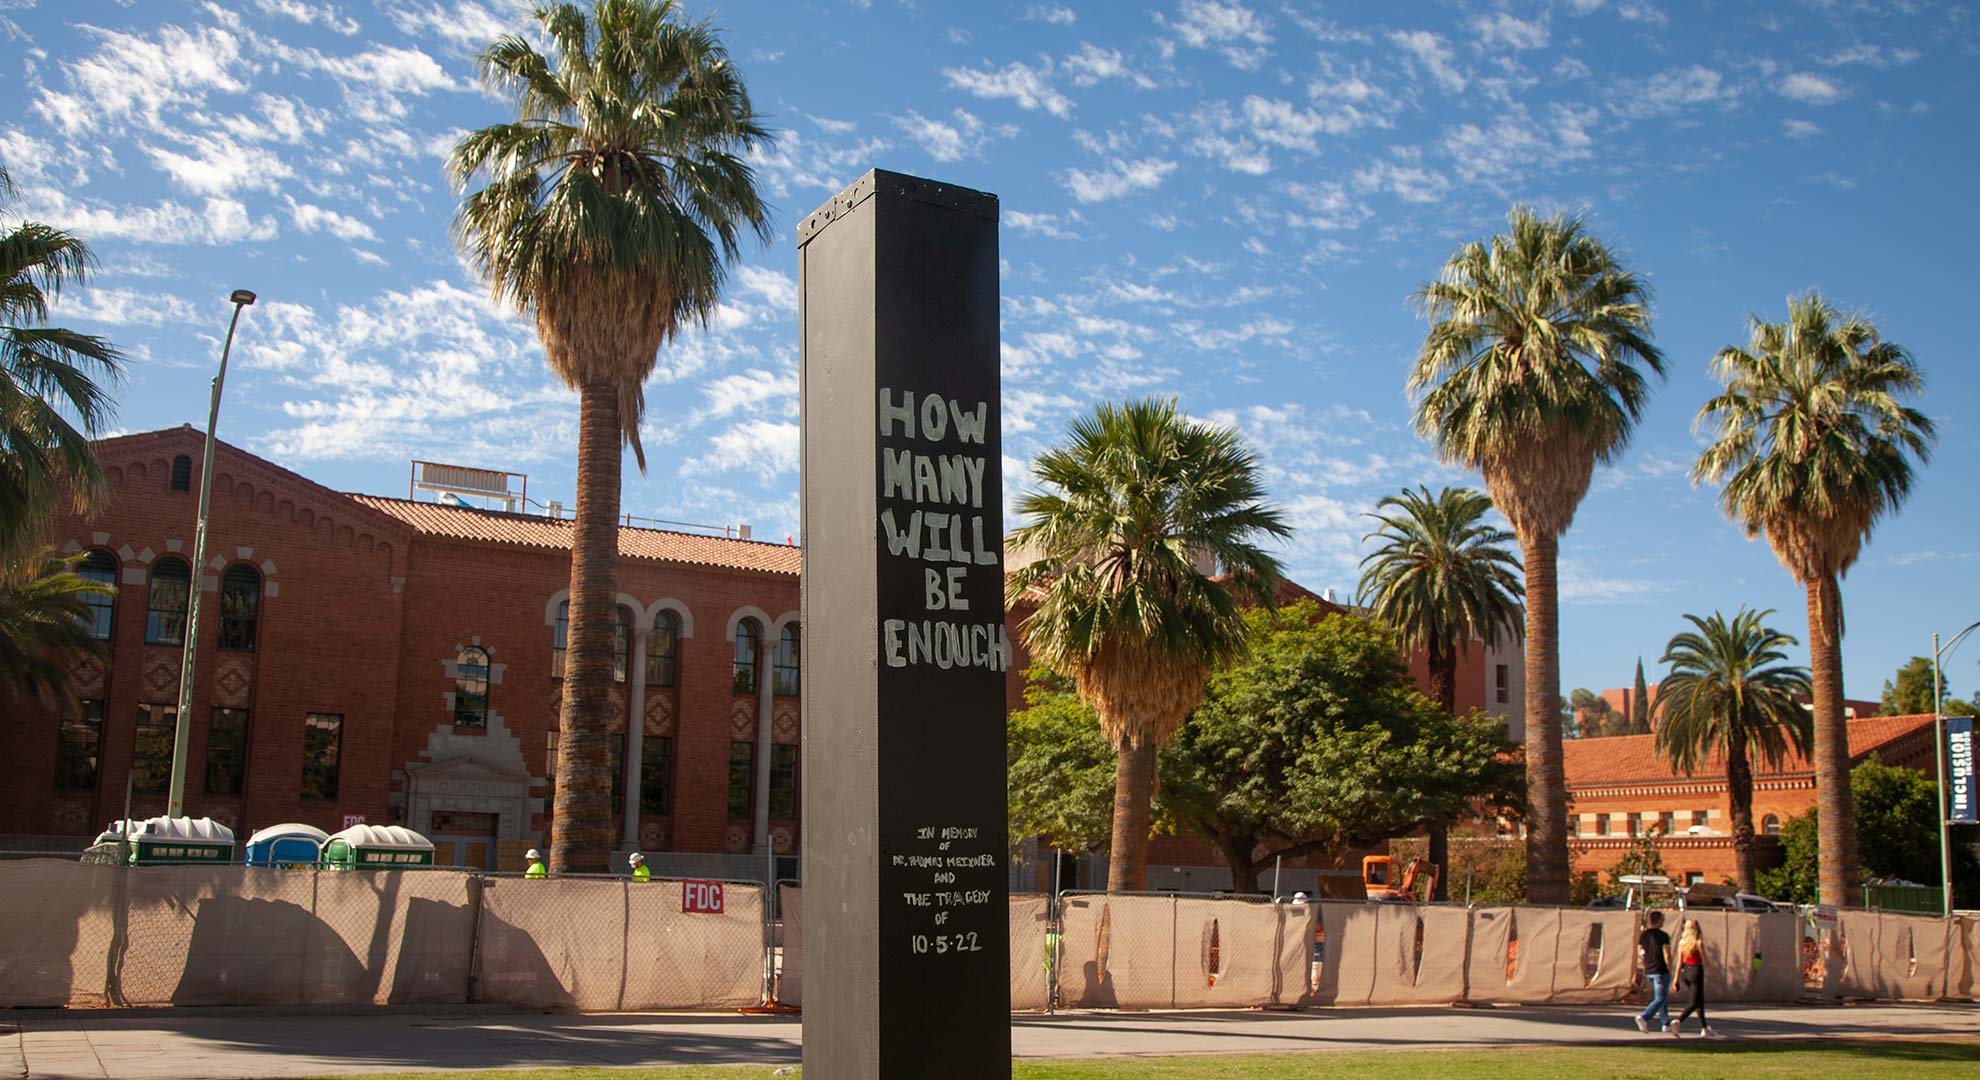 A black pilar that says "How many will be enough" stands in the middle of the University of Arizona Mall one week after the killing of Professor Thomas Meixner on campus. A few days prior university officials held a candlelight vigil where the pilar stands. 